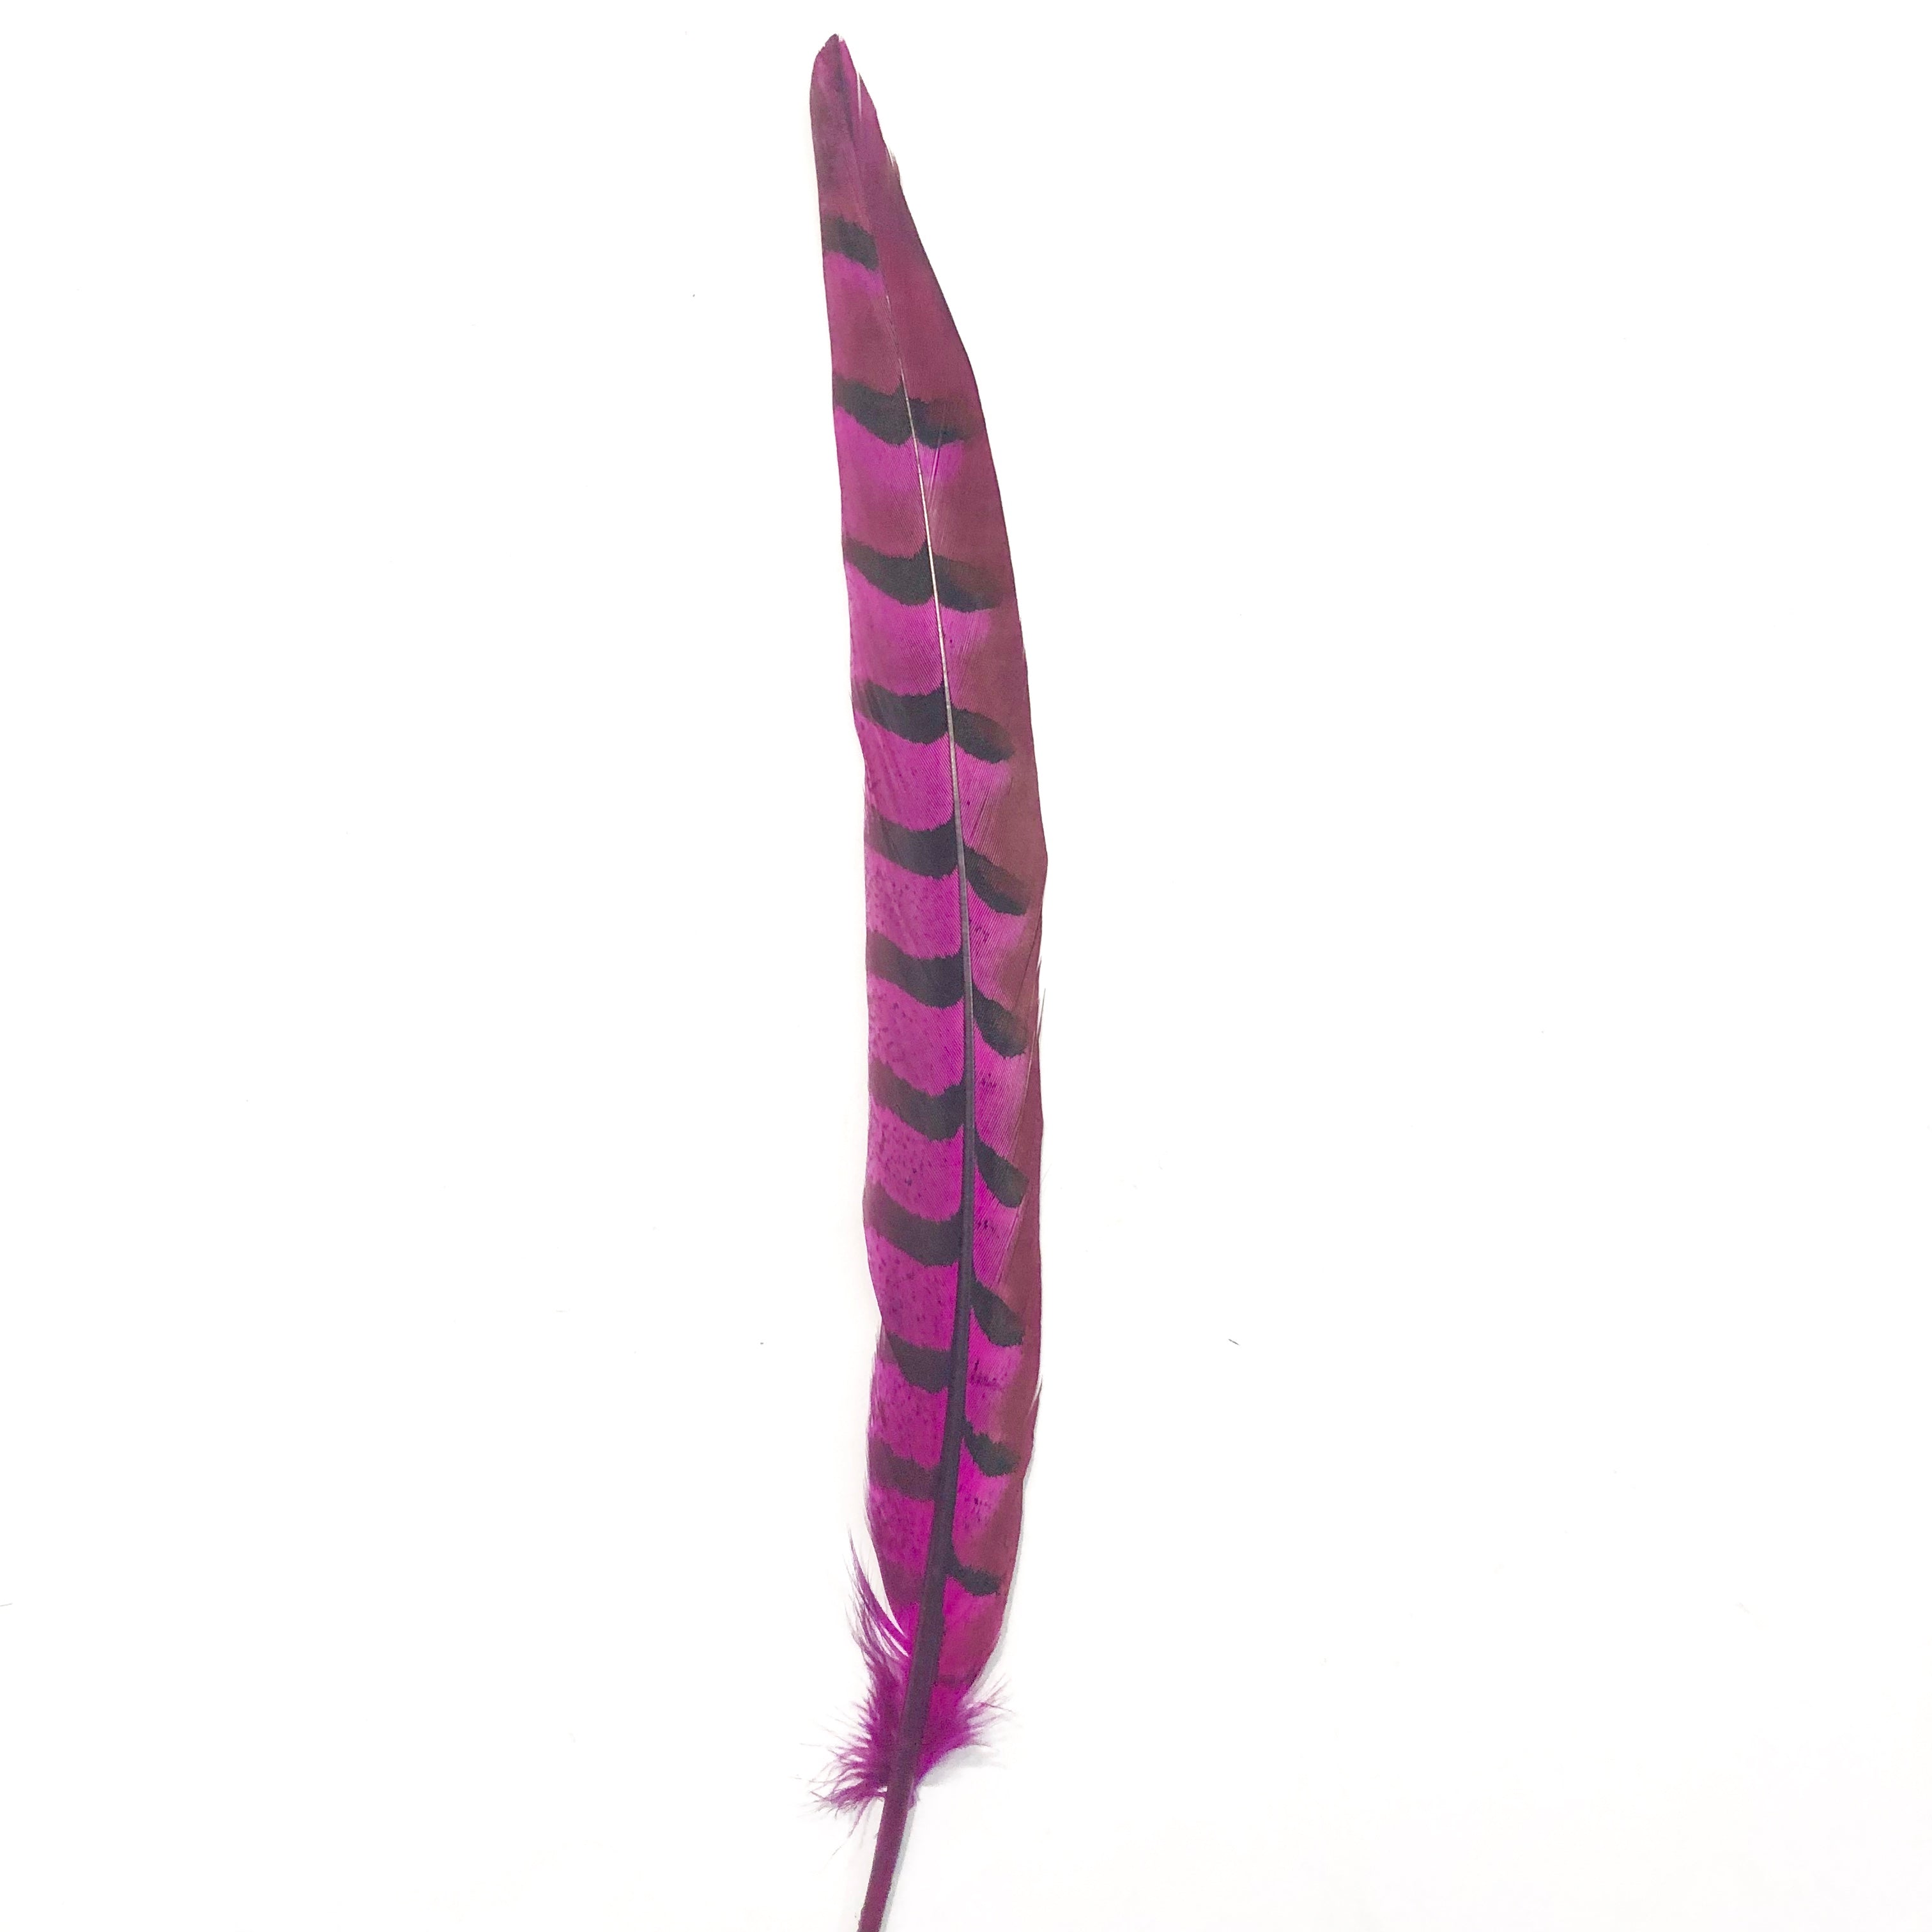 12" to 14" Reeves Pheasant Tail Feather - Cerise ((SECONDS))